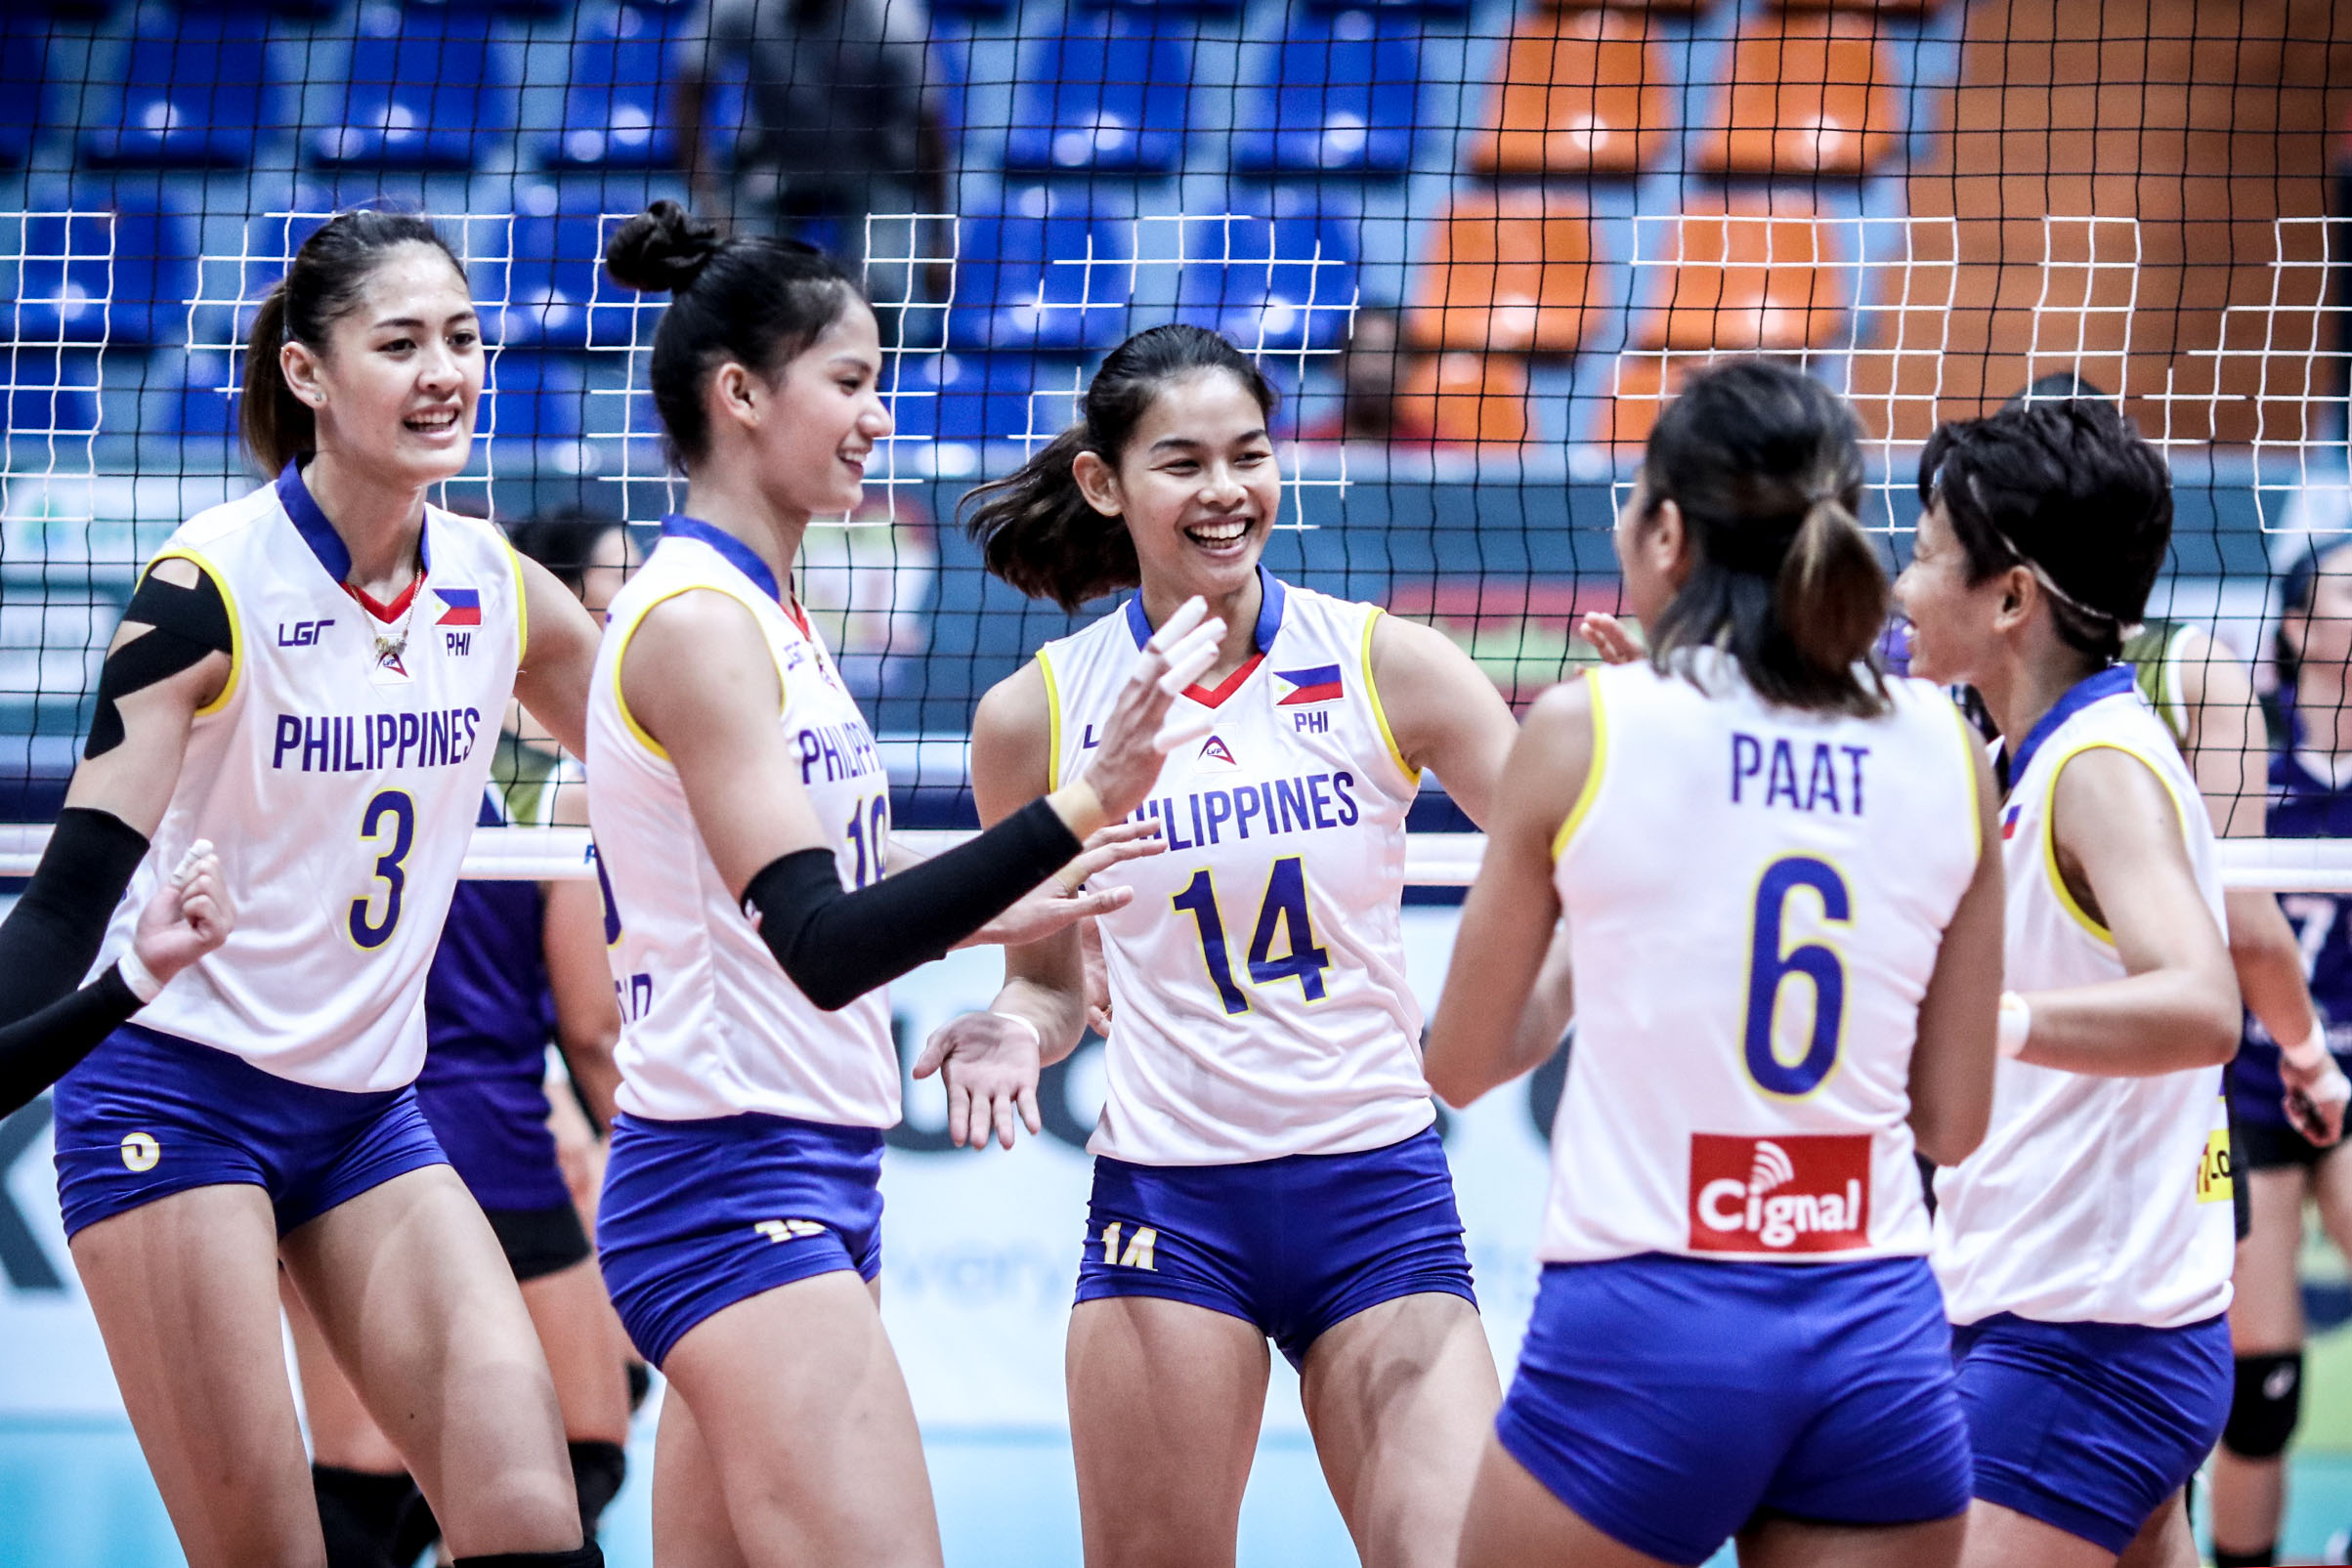 FULL CONTROL. The Philippine women's volleyball teams puts on a dominant show in the PSL. Photo by Mix Gatpandan/Rappler  